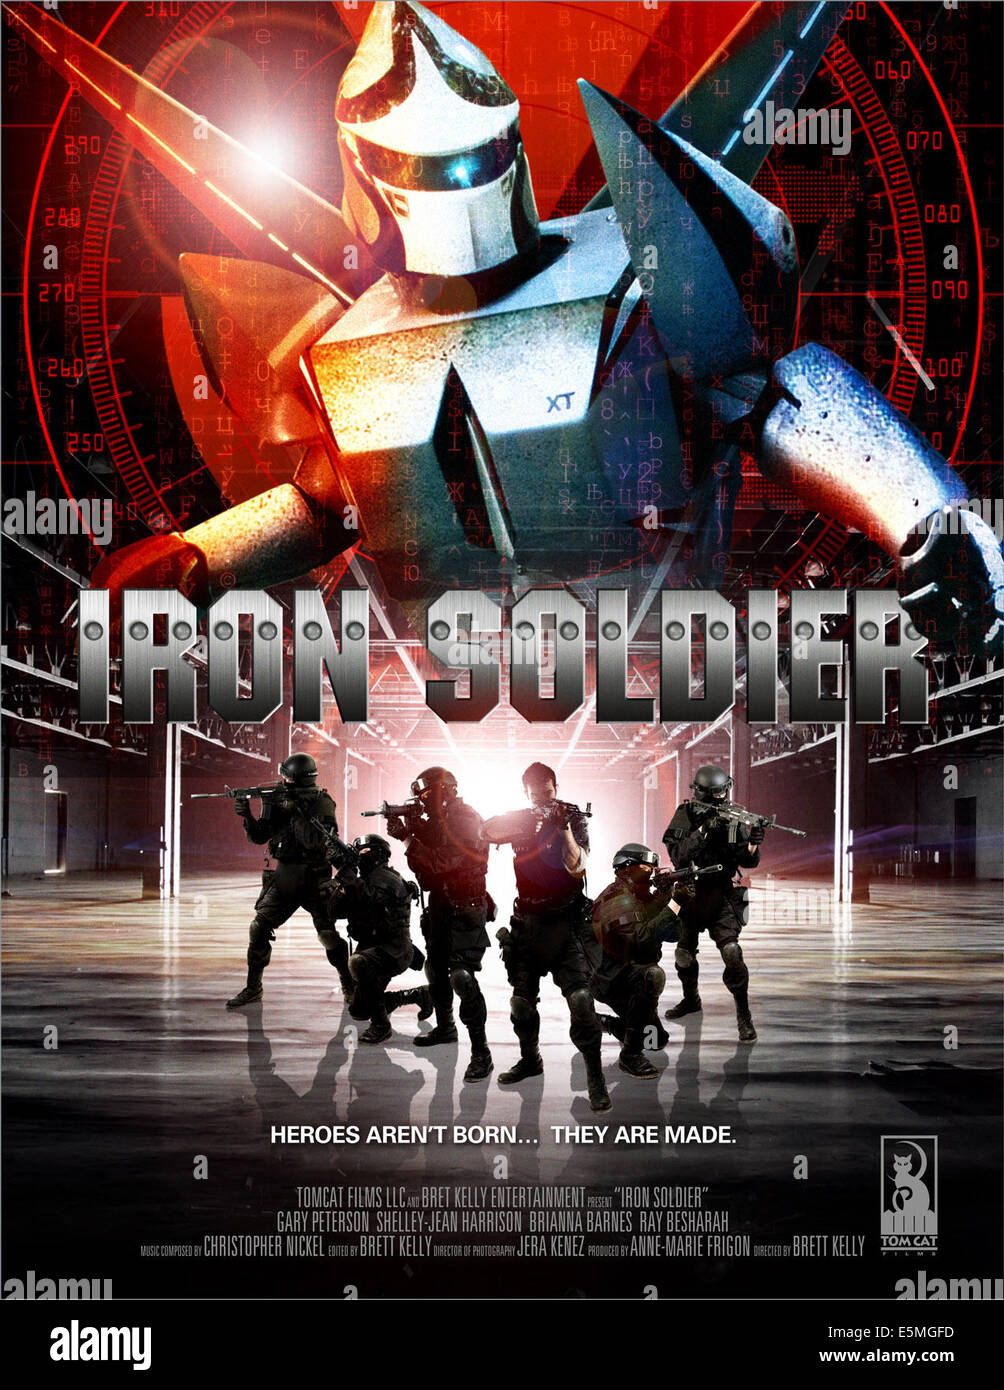 IRON SOLDIER, international poster art, 2010. ©Dudez Productions/courtesy Everett Collection Stock Photo